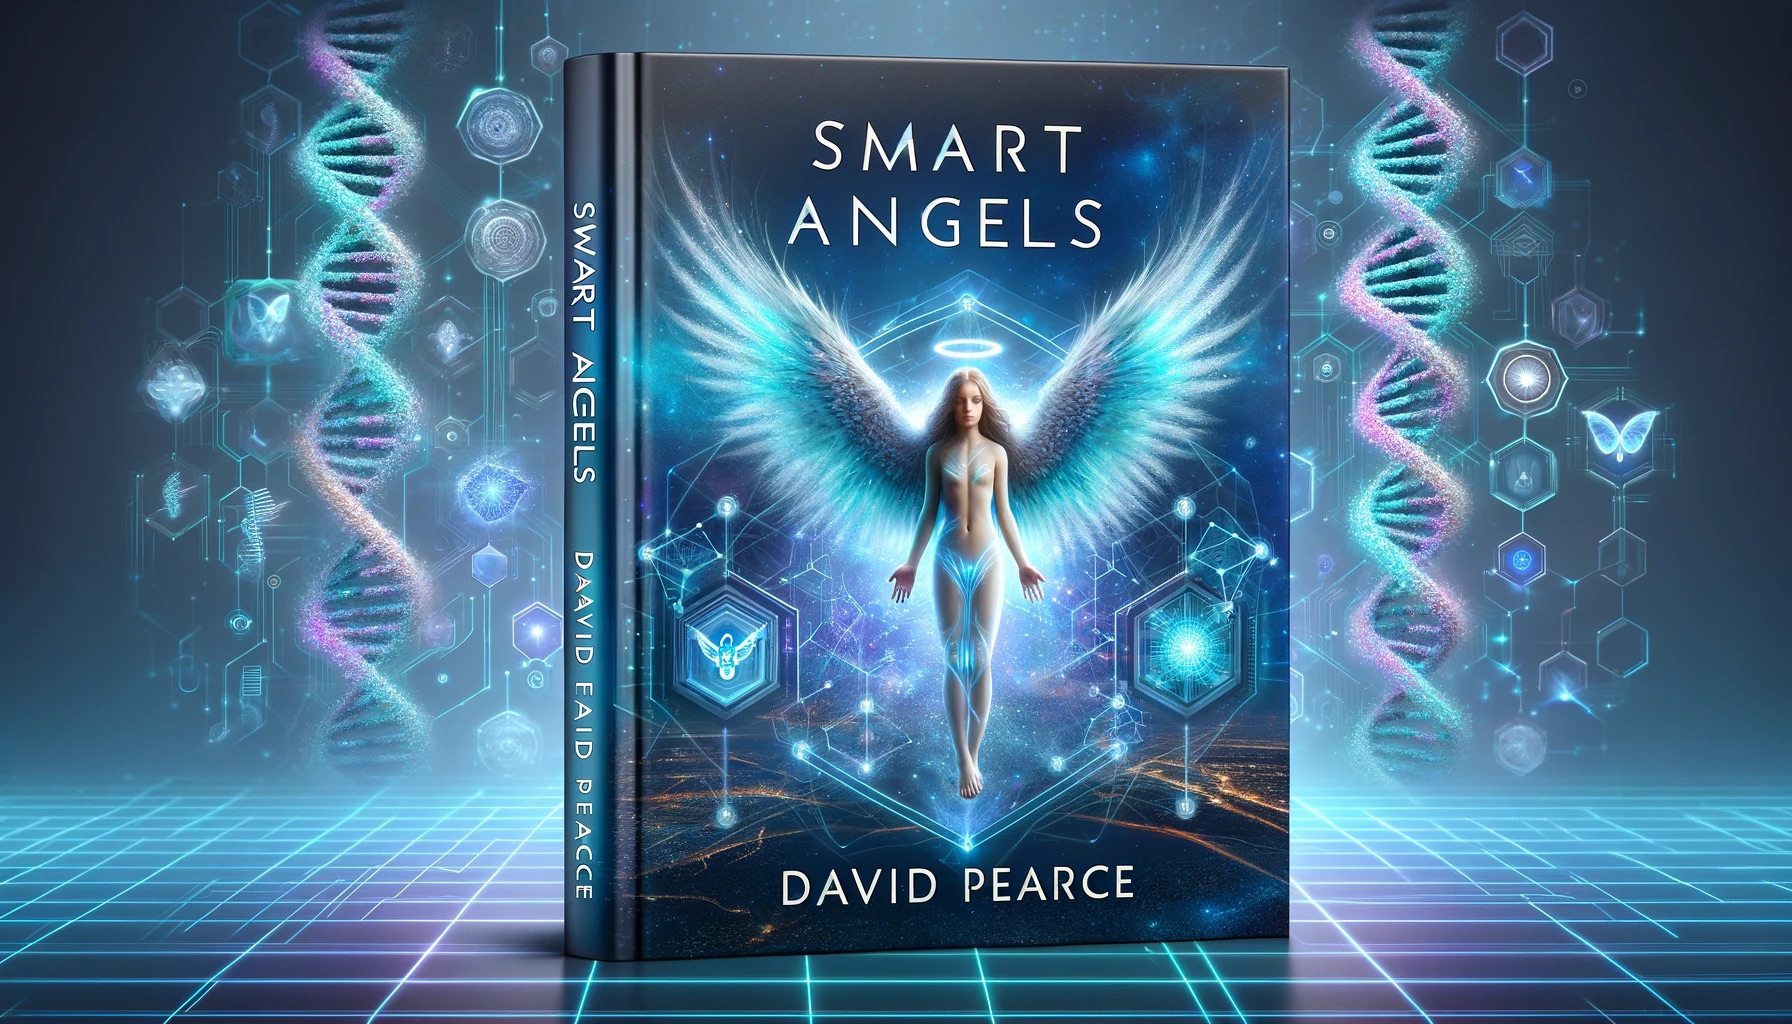 Smart Angels by David Pearce